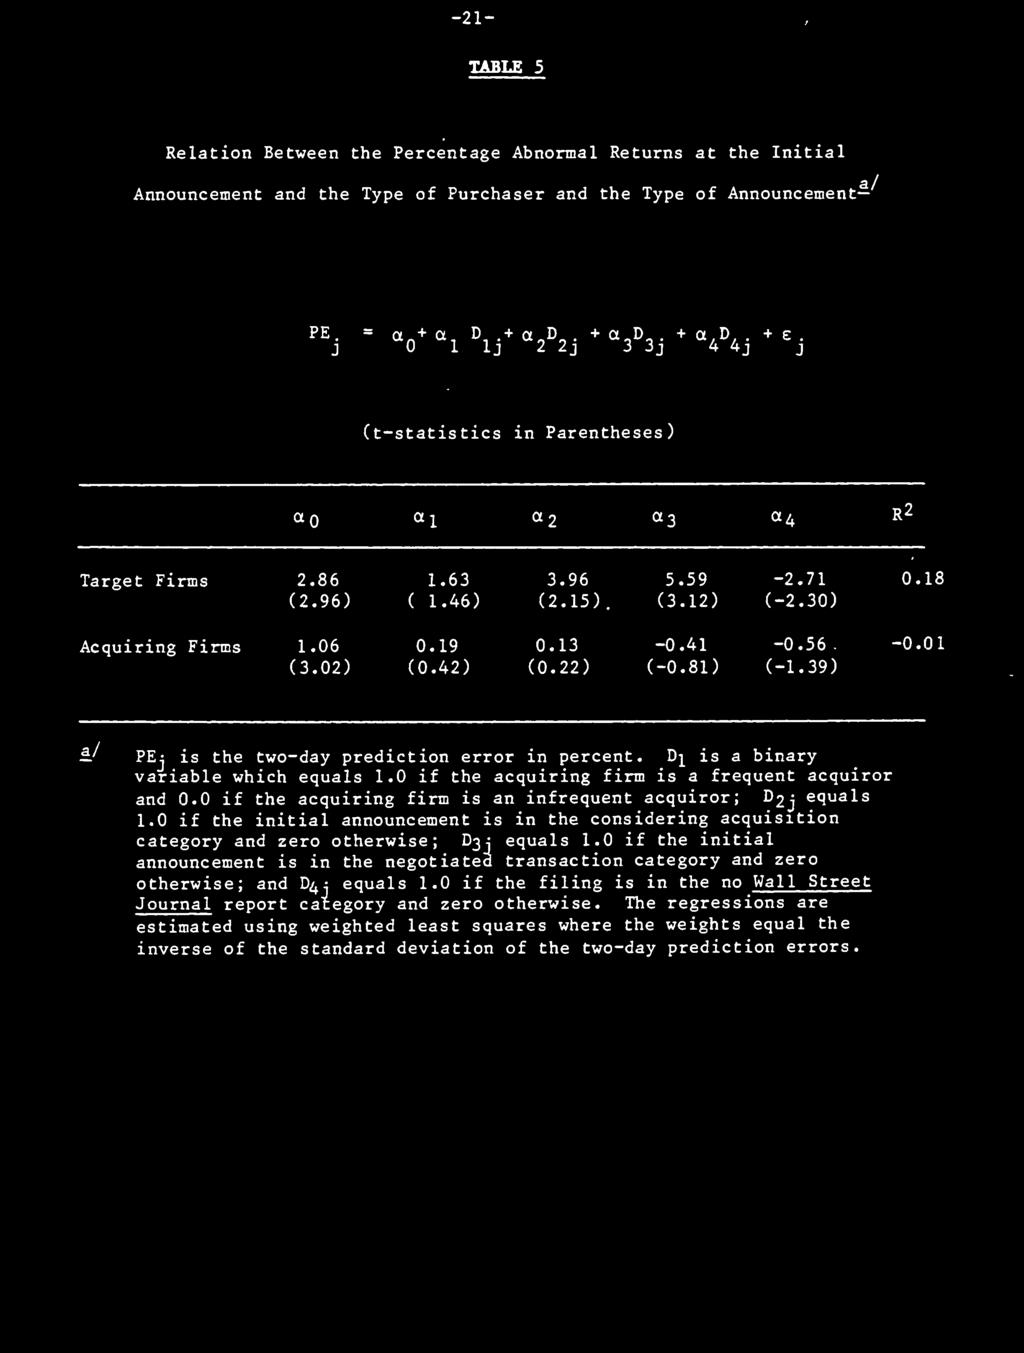 01 (3.02) (0.42) (0.22) (-0.81) (-1.39) ' PE: is the two-day prediction error in percent. D^ is a binary variable which equals 1.0 if the acquiring firm is a frequent acquiror and 0.